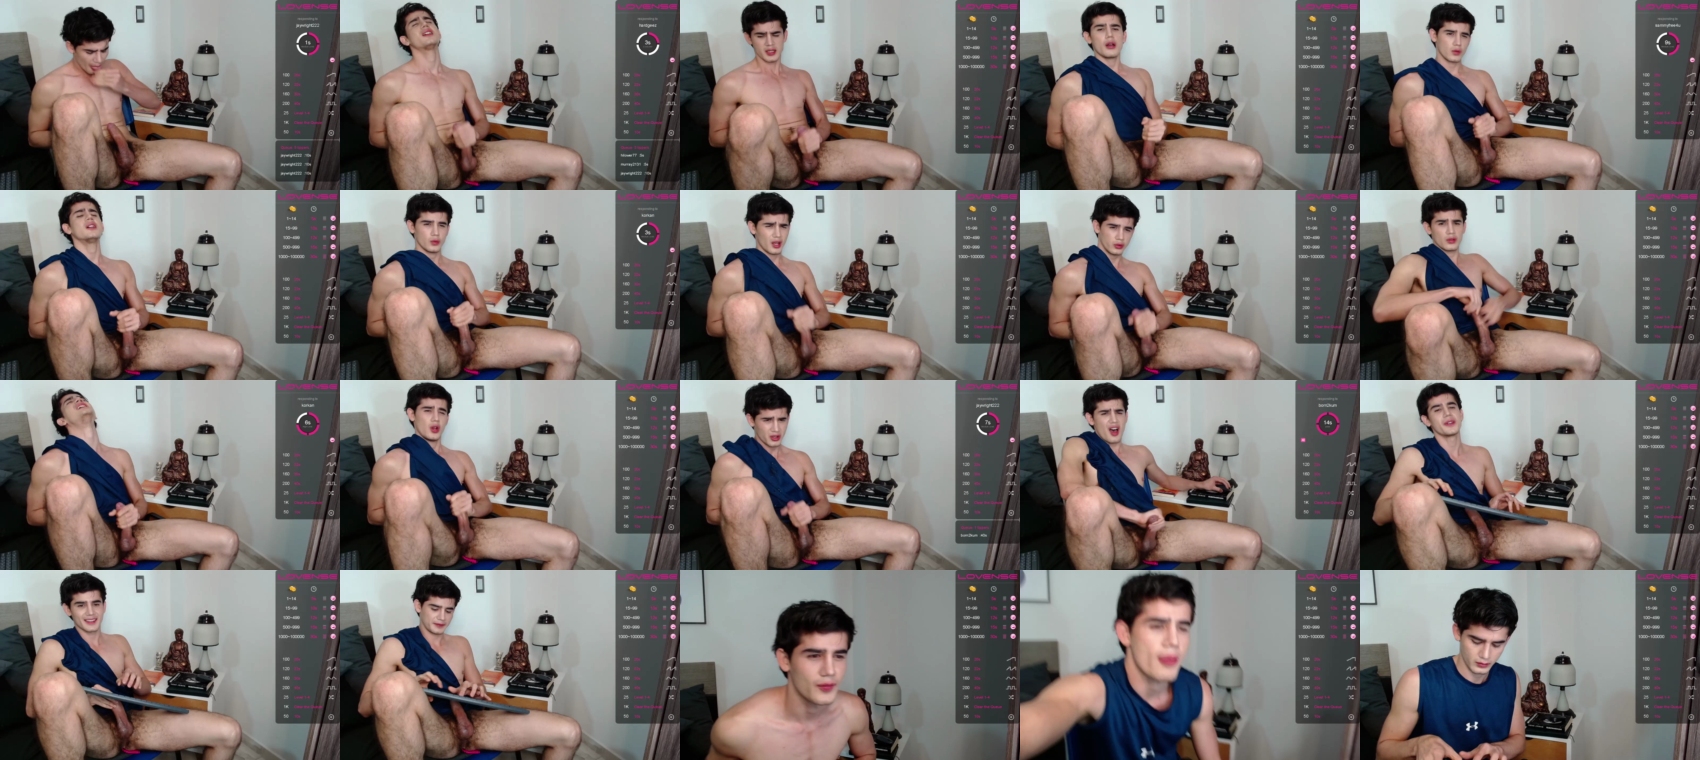 connor_wesley1 natural CAM SHOW @ Chaturbate 09-03-2022